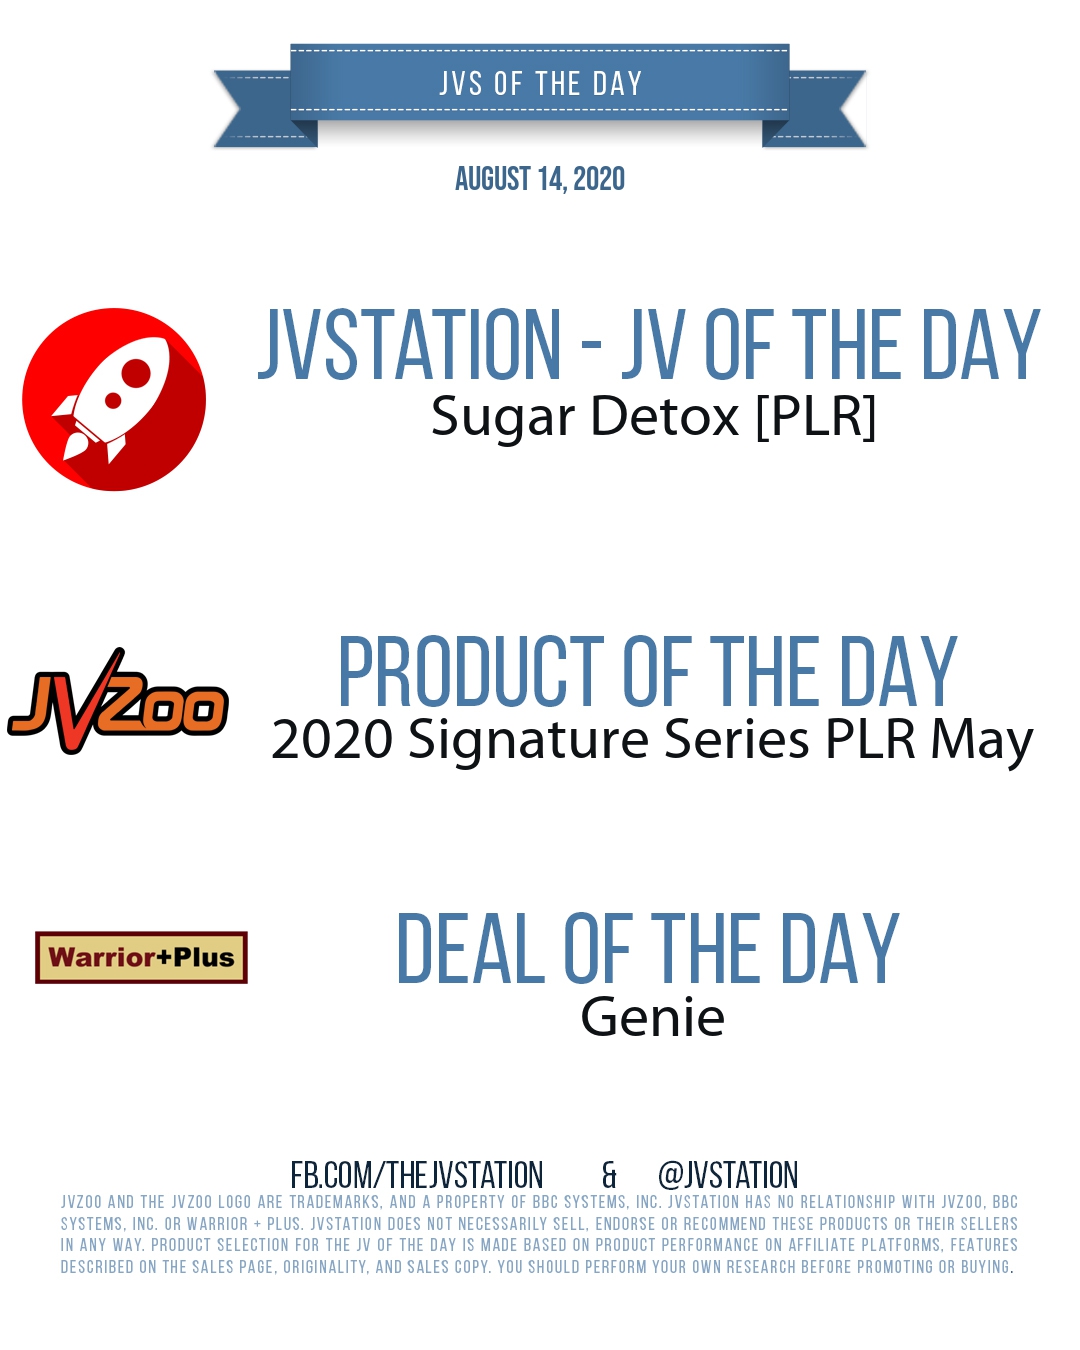 JVs of the day - August 14, 2020